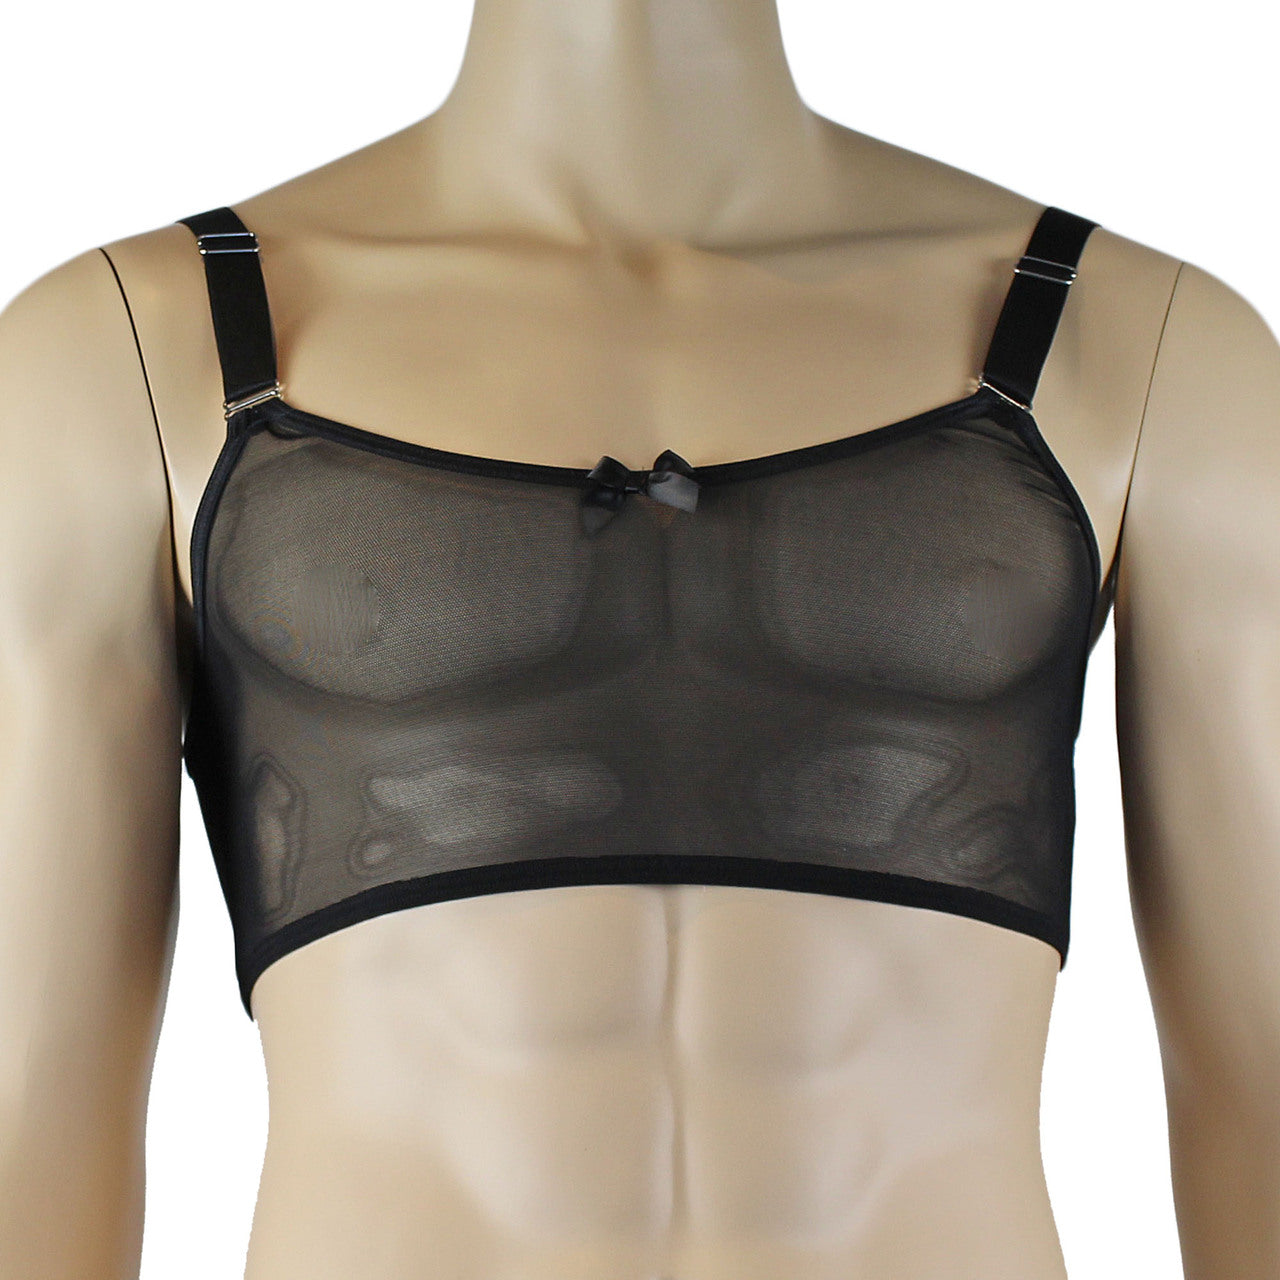 Mens Exotic Sheer Mesh Crop Bra Top Camisole & G string - Sizes up to 3XL Black